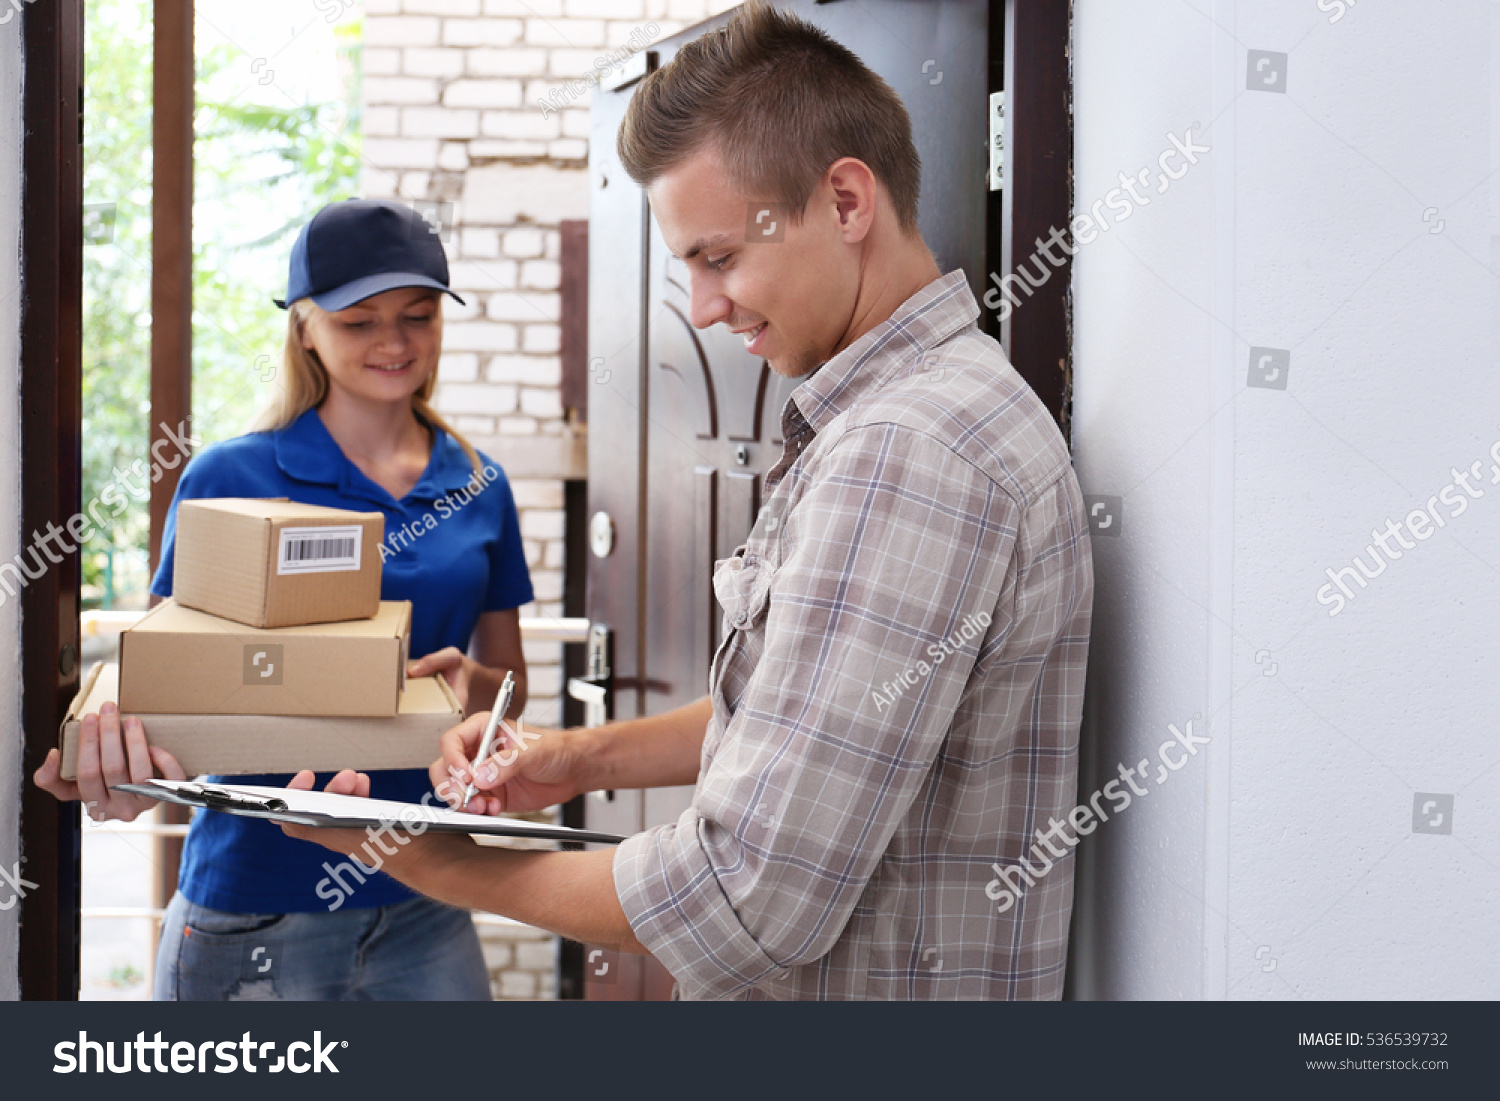 Young man receiving package from courier #536539732